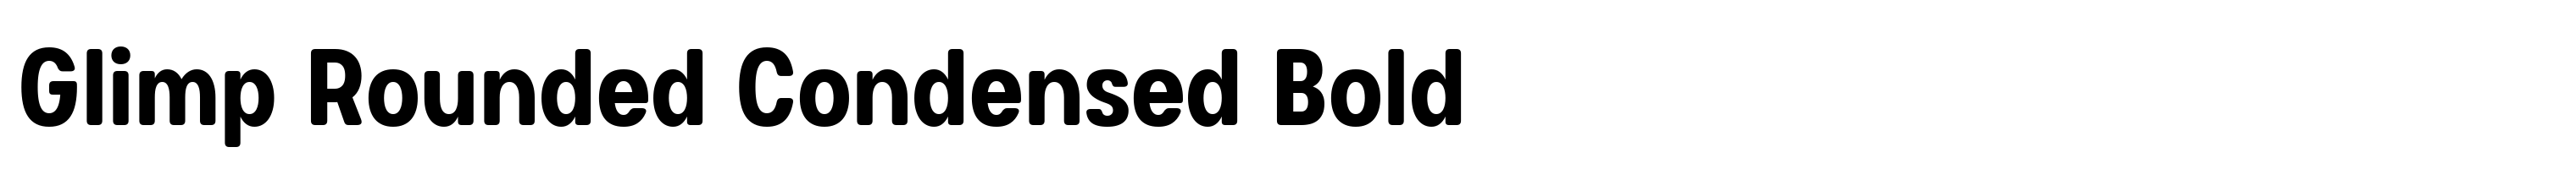 Glimp Rounded Condensed Bold